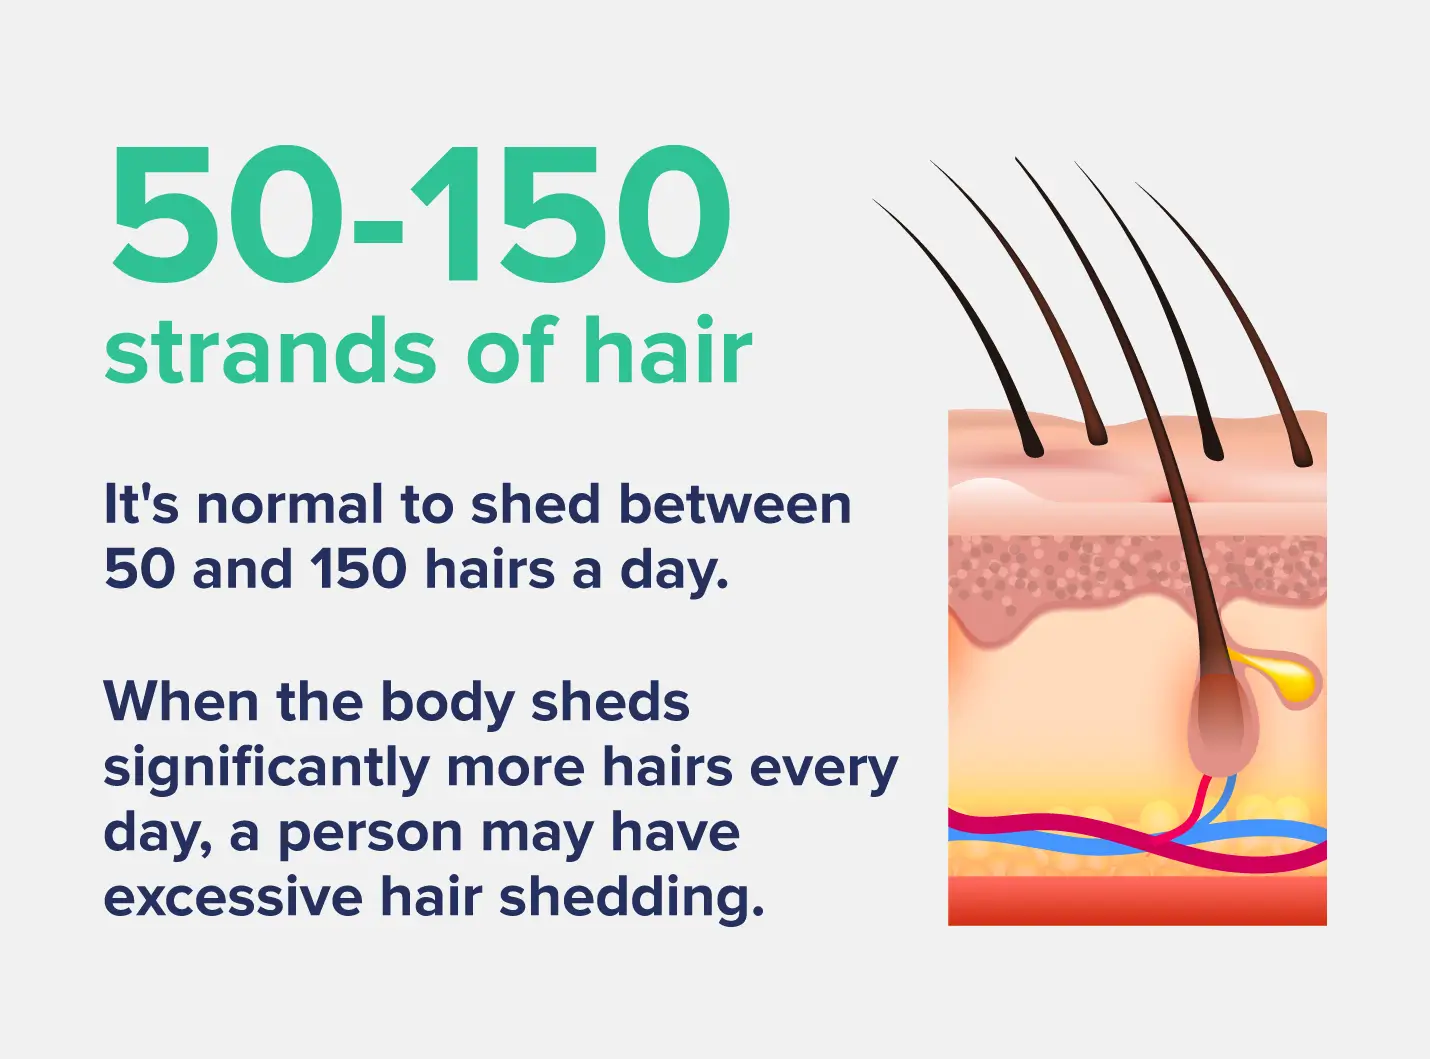 it's normal to shed 50-150 strands of hair per day